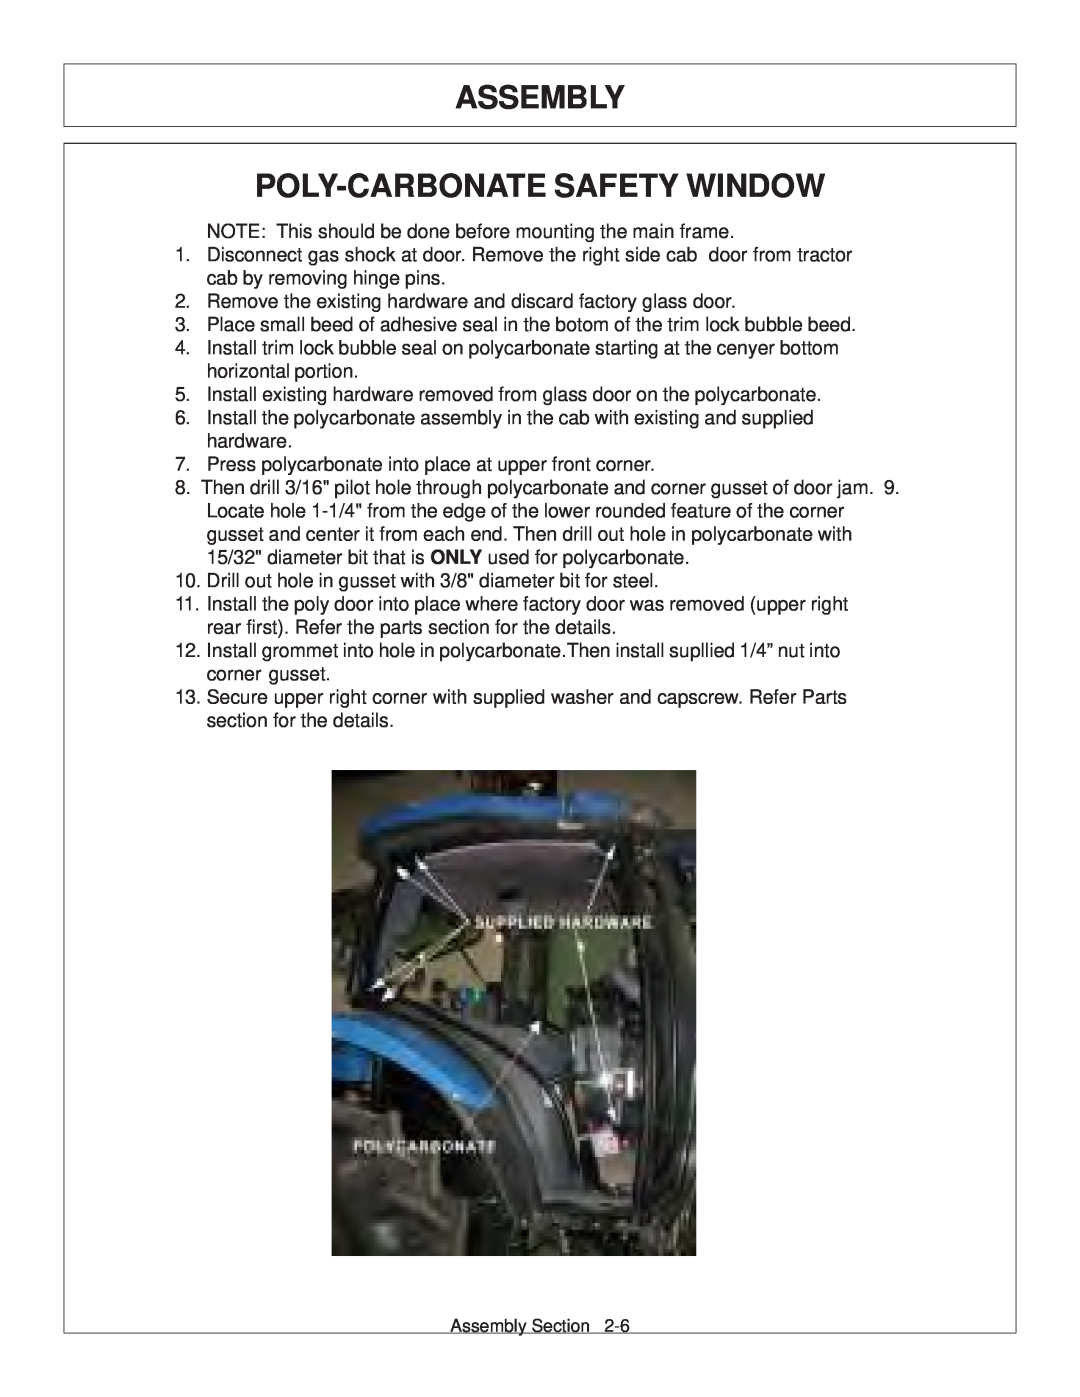 Tiger Products Co., Ltd 6020009 manual Assembly Poly-Carbonate Safety Window 